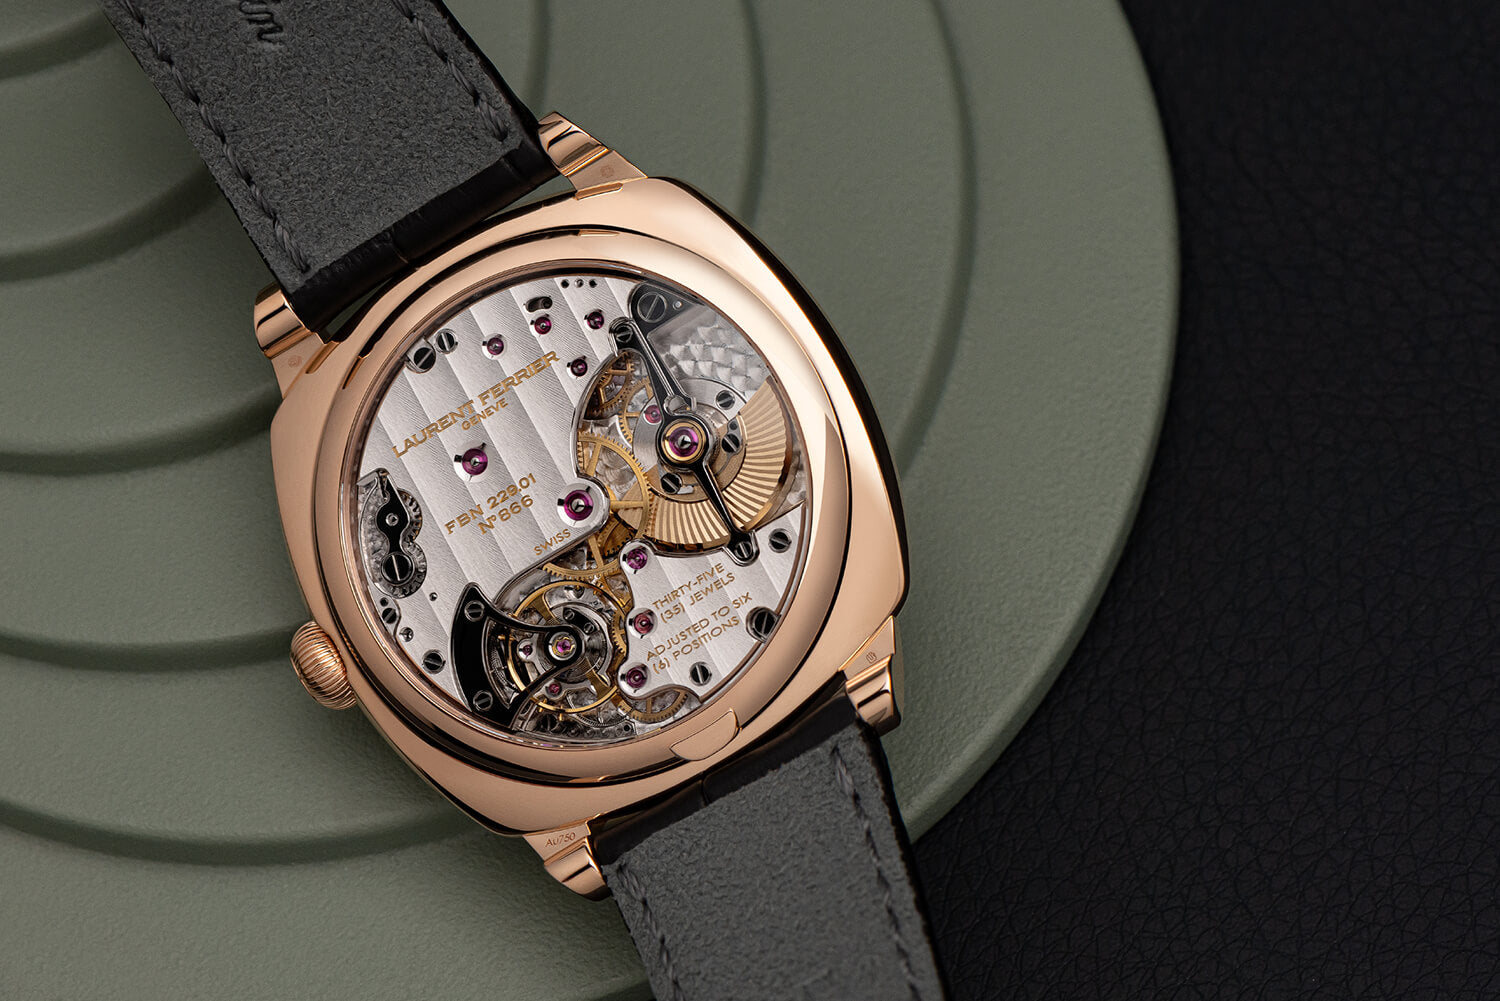 view of highly hand-finished FBN 229.01 movement in 18k red gold cushion-shaped "square" case. Photographer Cyril Biselx